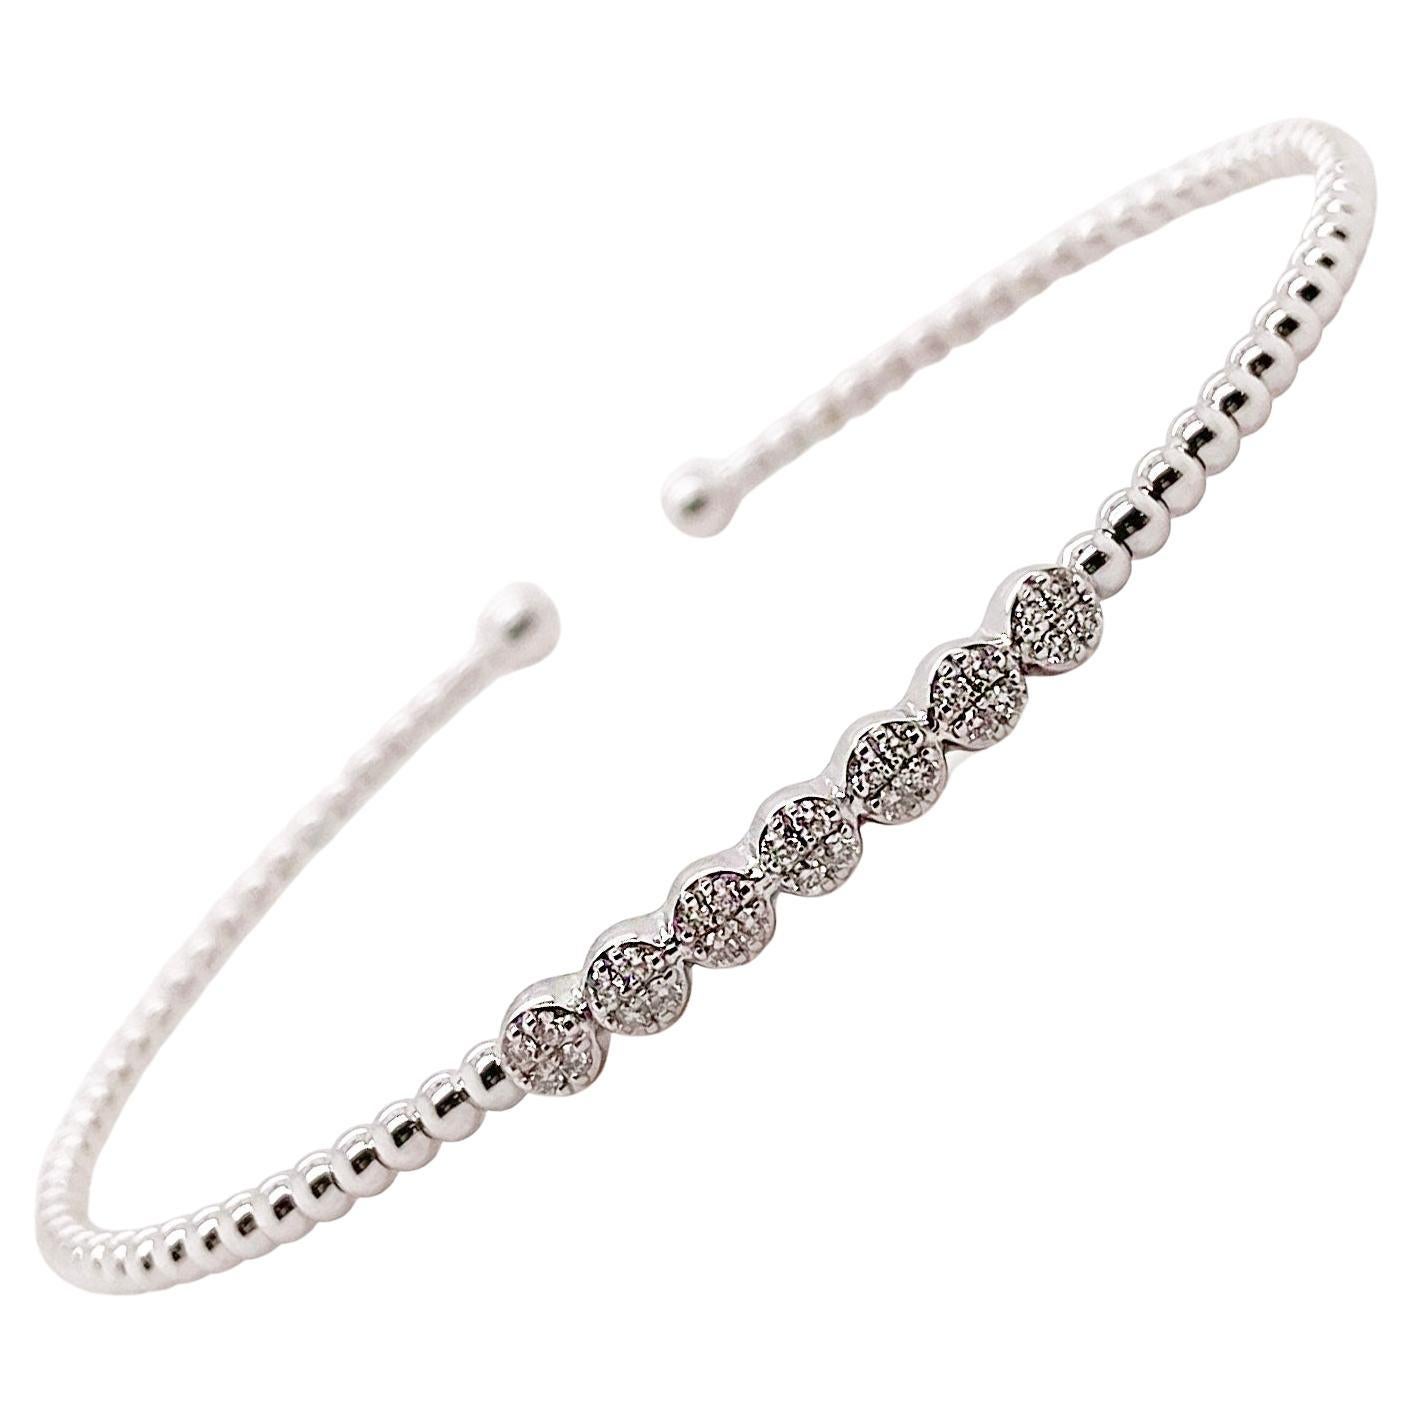 Bead Cuff Bracelet w Cluster Diamond Stations, White Gold, Flexible Bangle For Sale